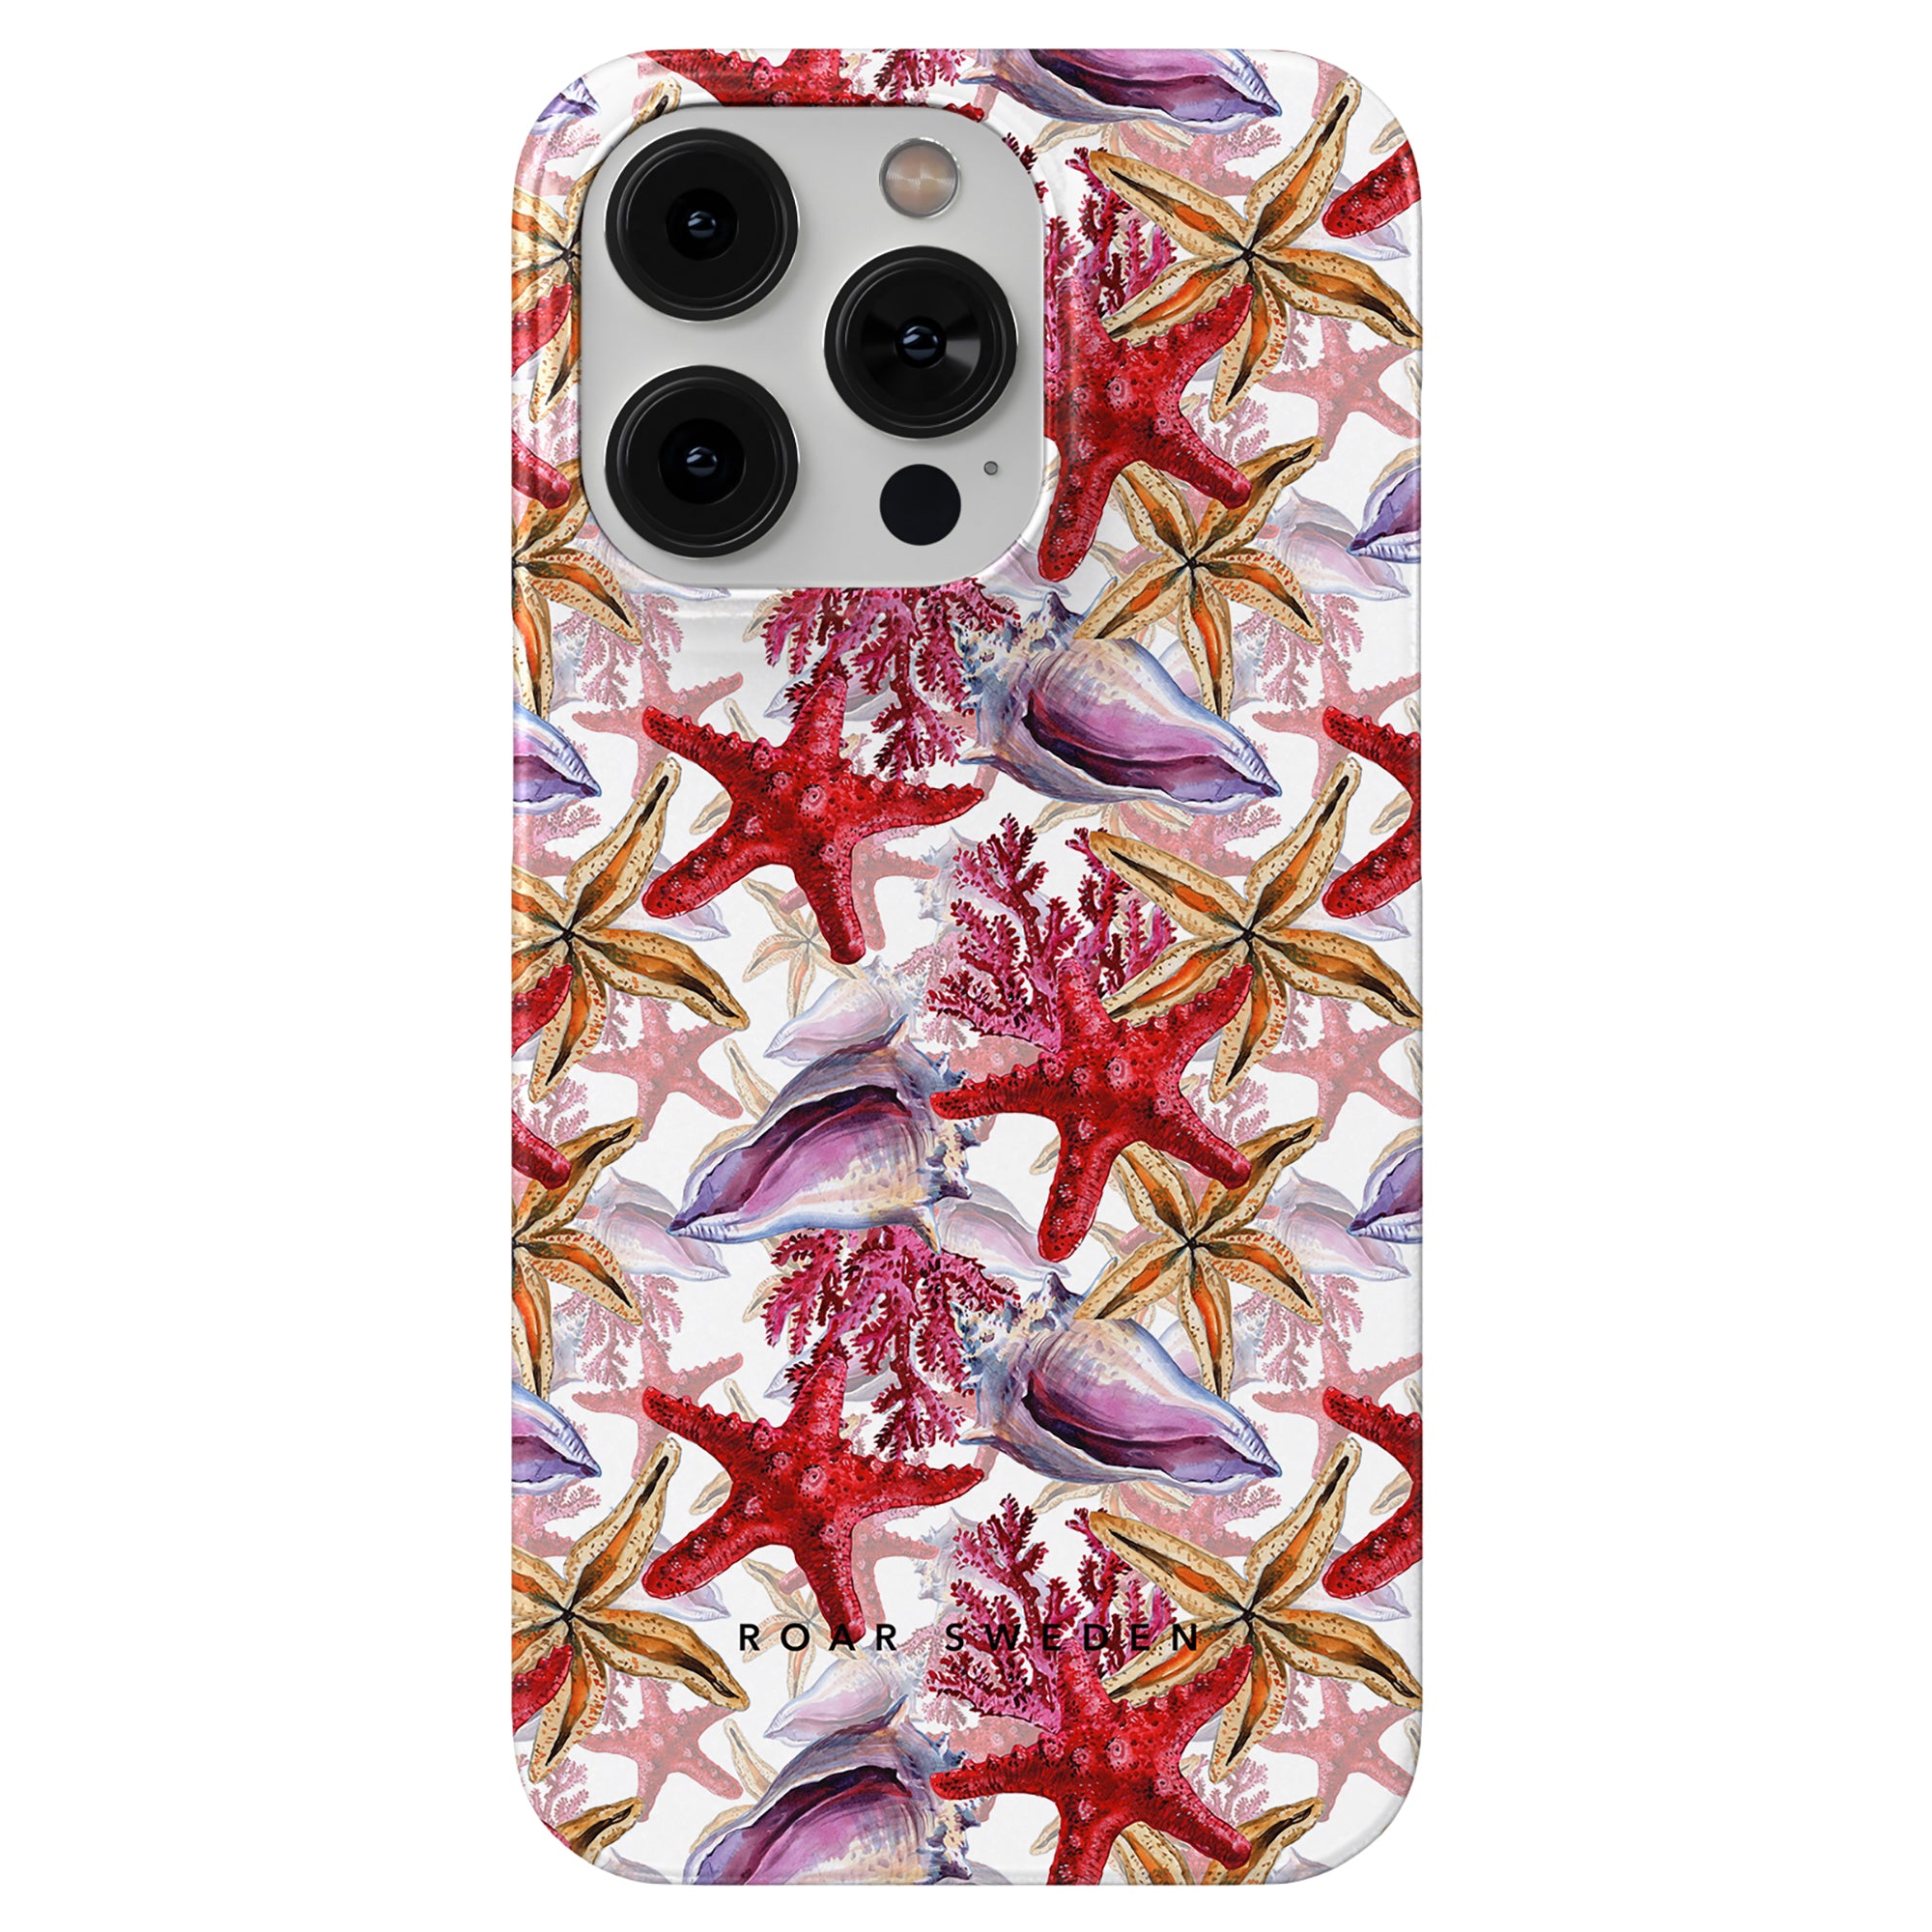 A waterproof phone case with a marine life pattern featuring starfish and Coral Reef - Slim case.